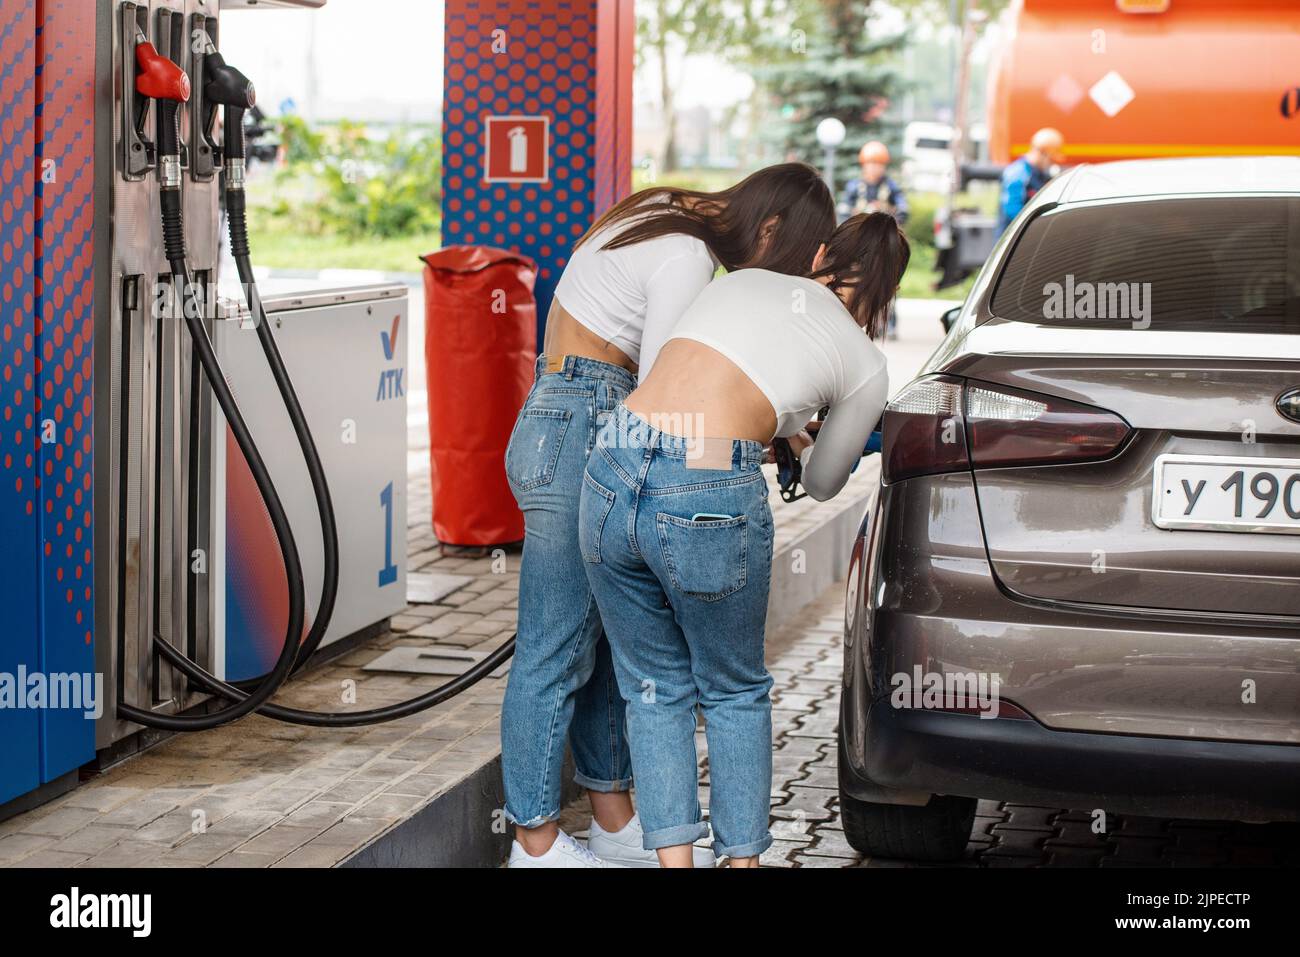 Genre photography. The work of the gas station 'Favorite Fuel Company' (LTK, owner - LLC 'TradeProject'). Girls while refueling a car with gasoline at a gas station. 04.08.2022 Russia, Lipetsk region, Lipetsk Photo credit: Oleg Kharseev/Kommersant/Sipa USA Stock Photo